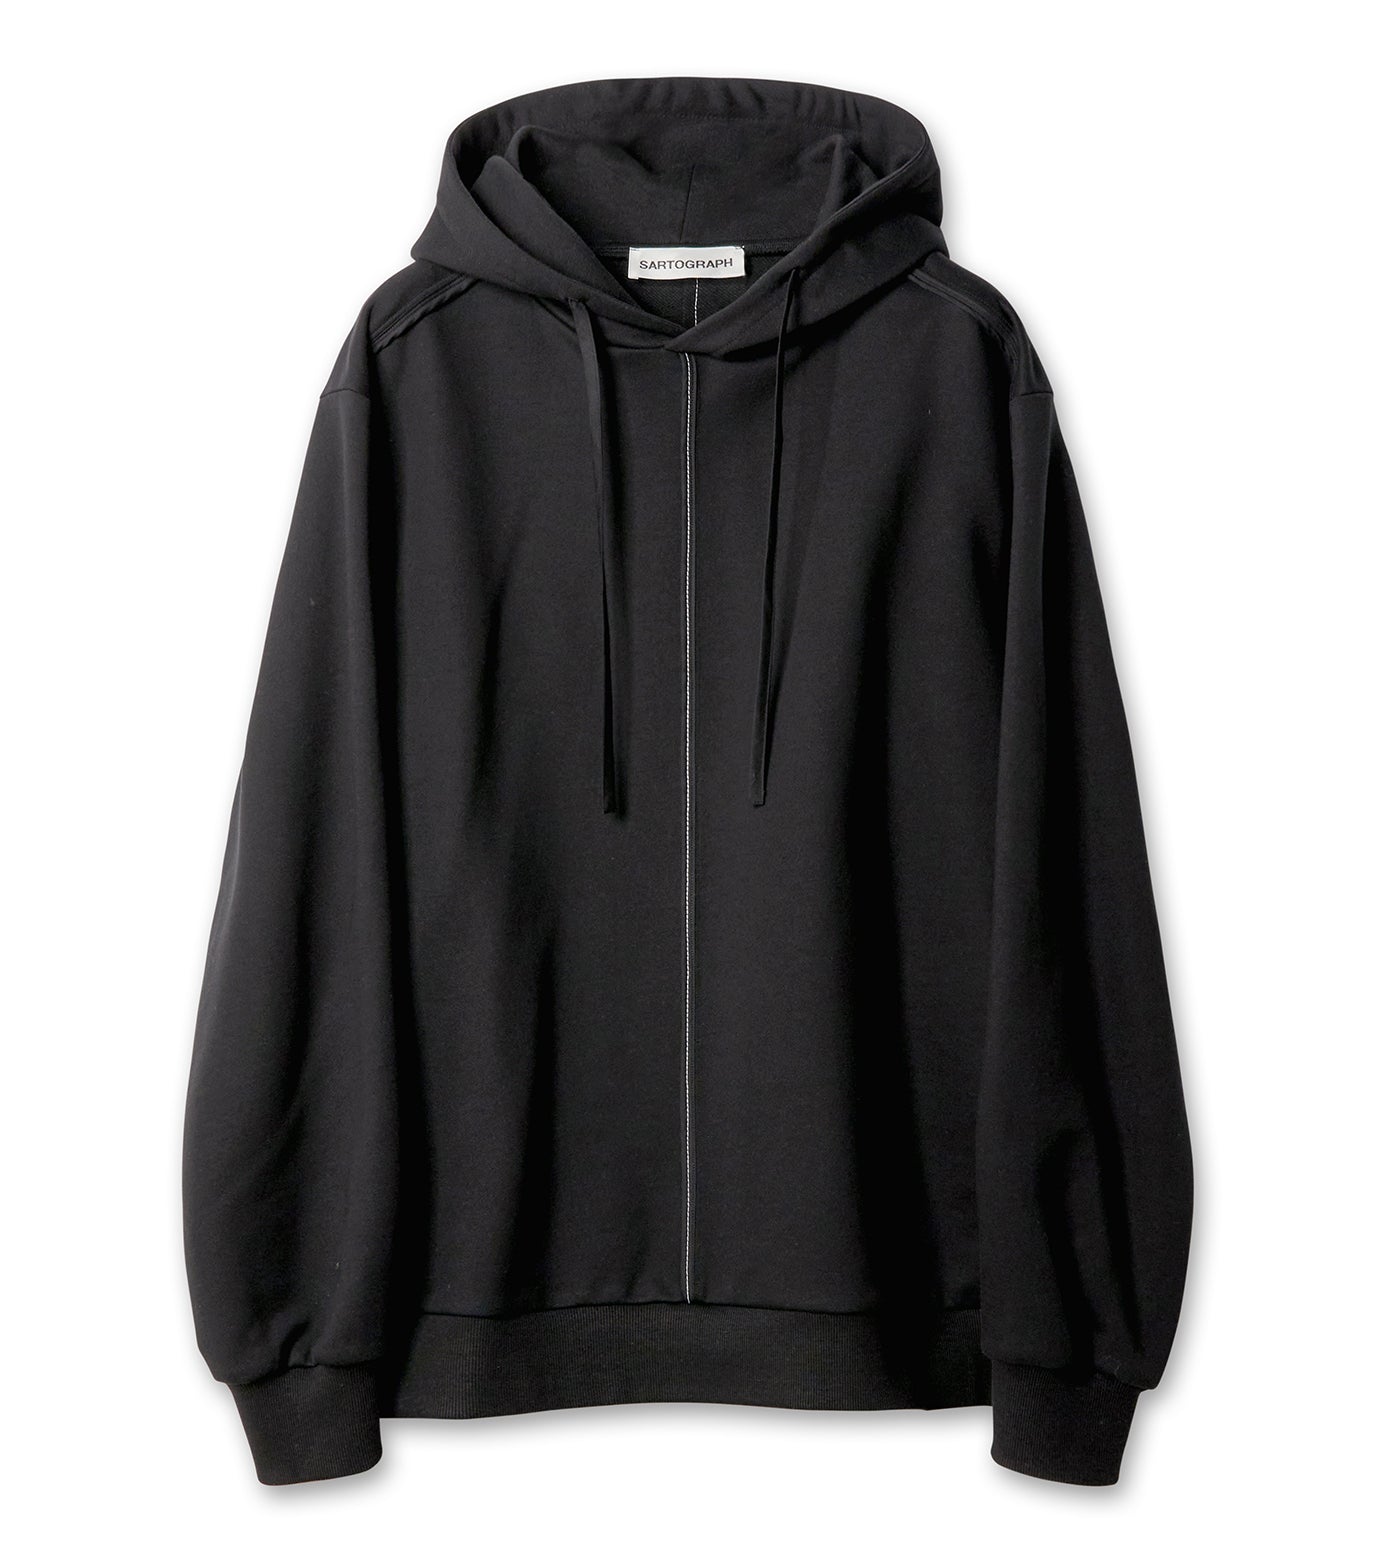 PIPING-STITCHED HOODIE